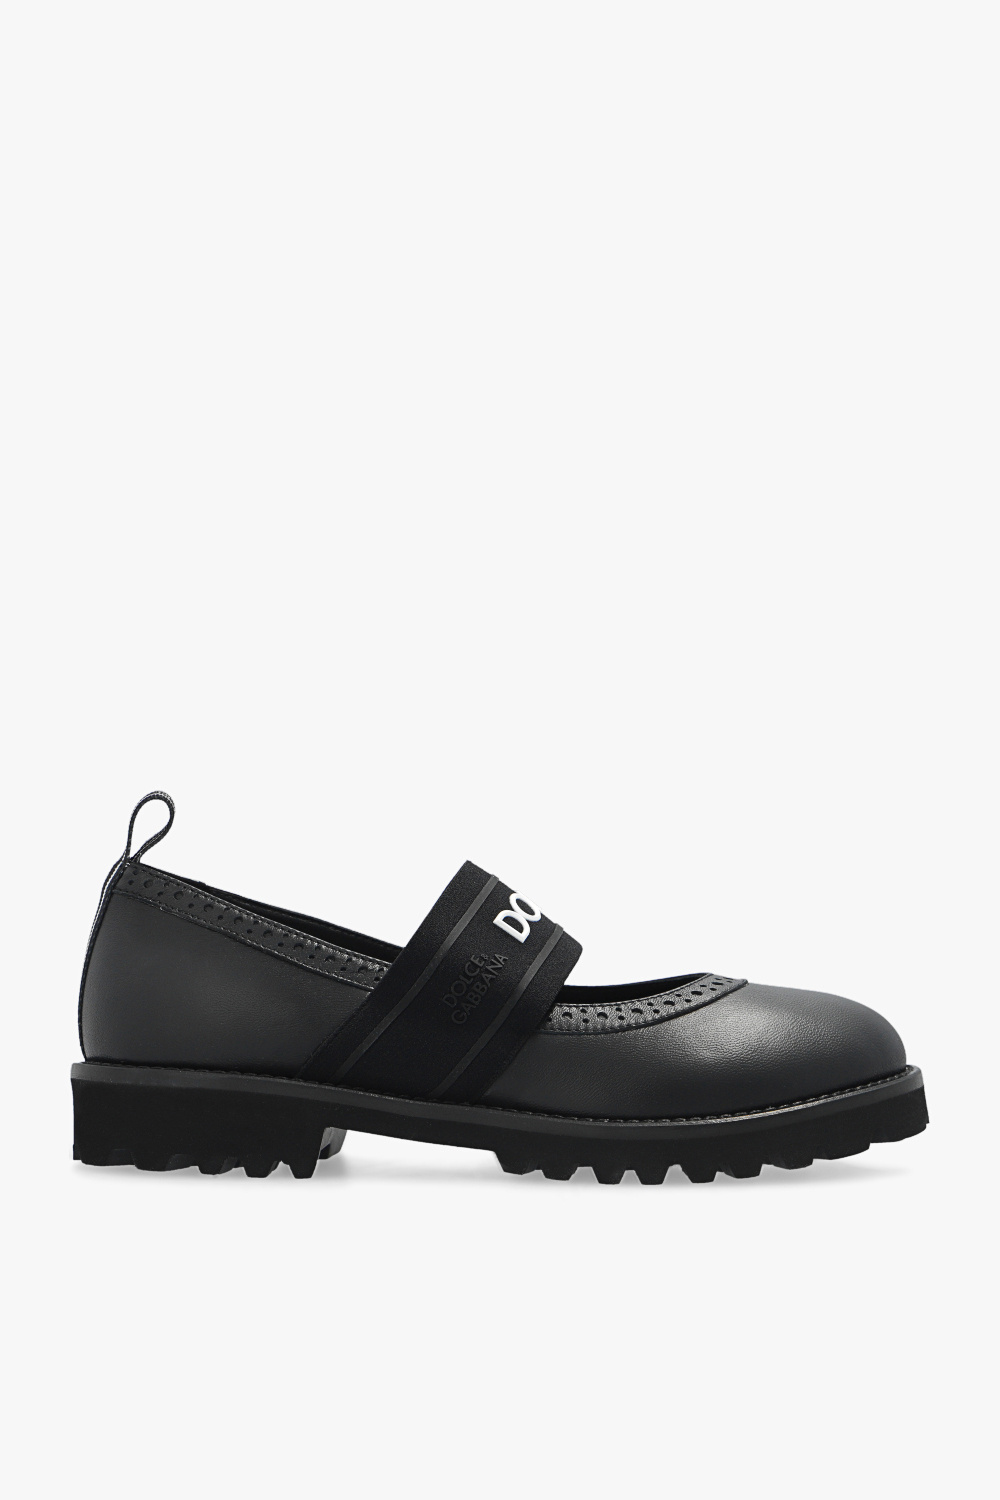 Dolce & Gabbana Kids Leather shoes with logo